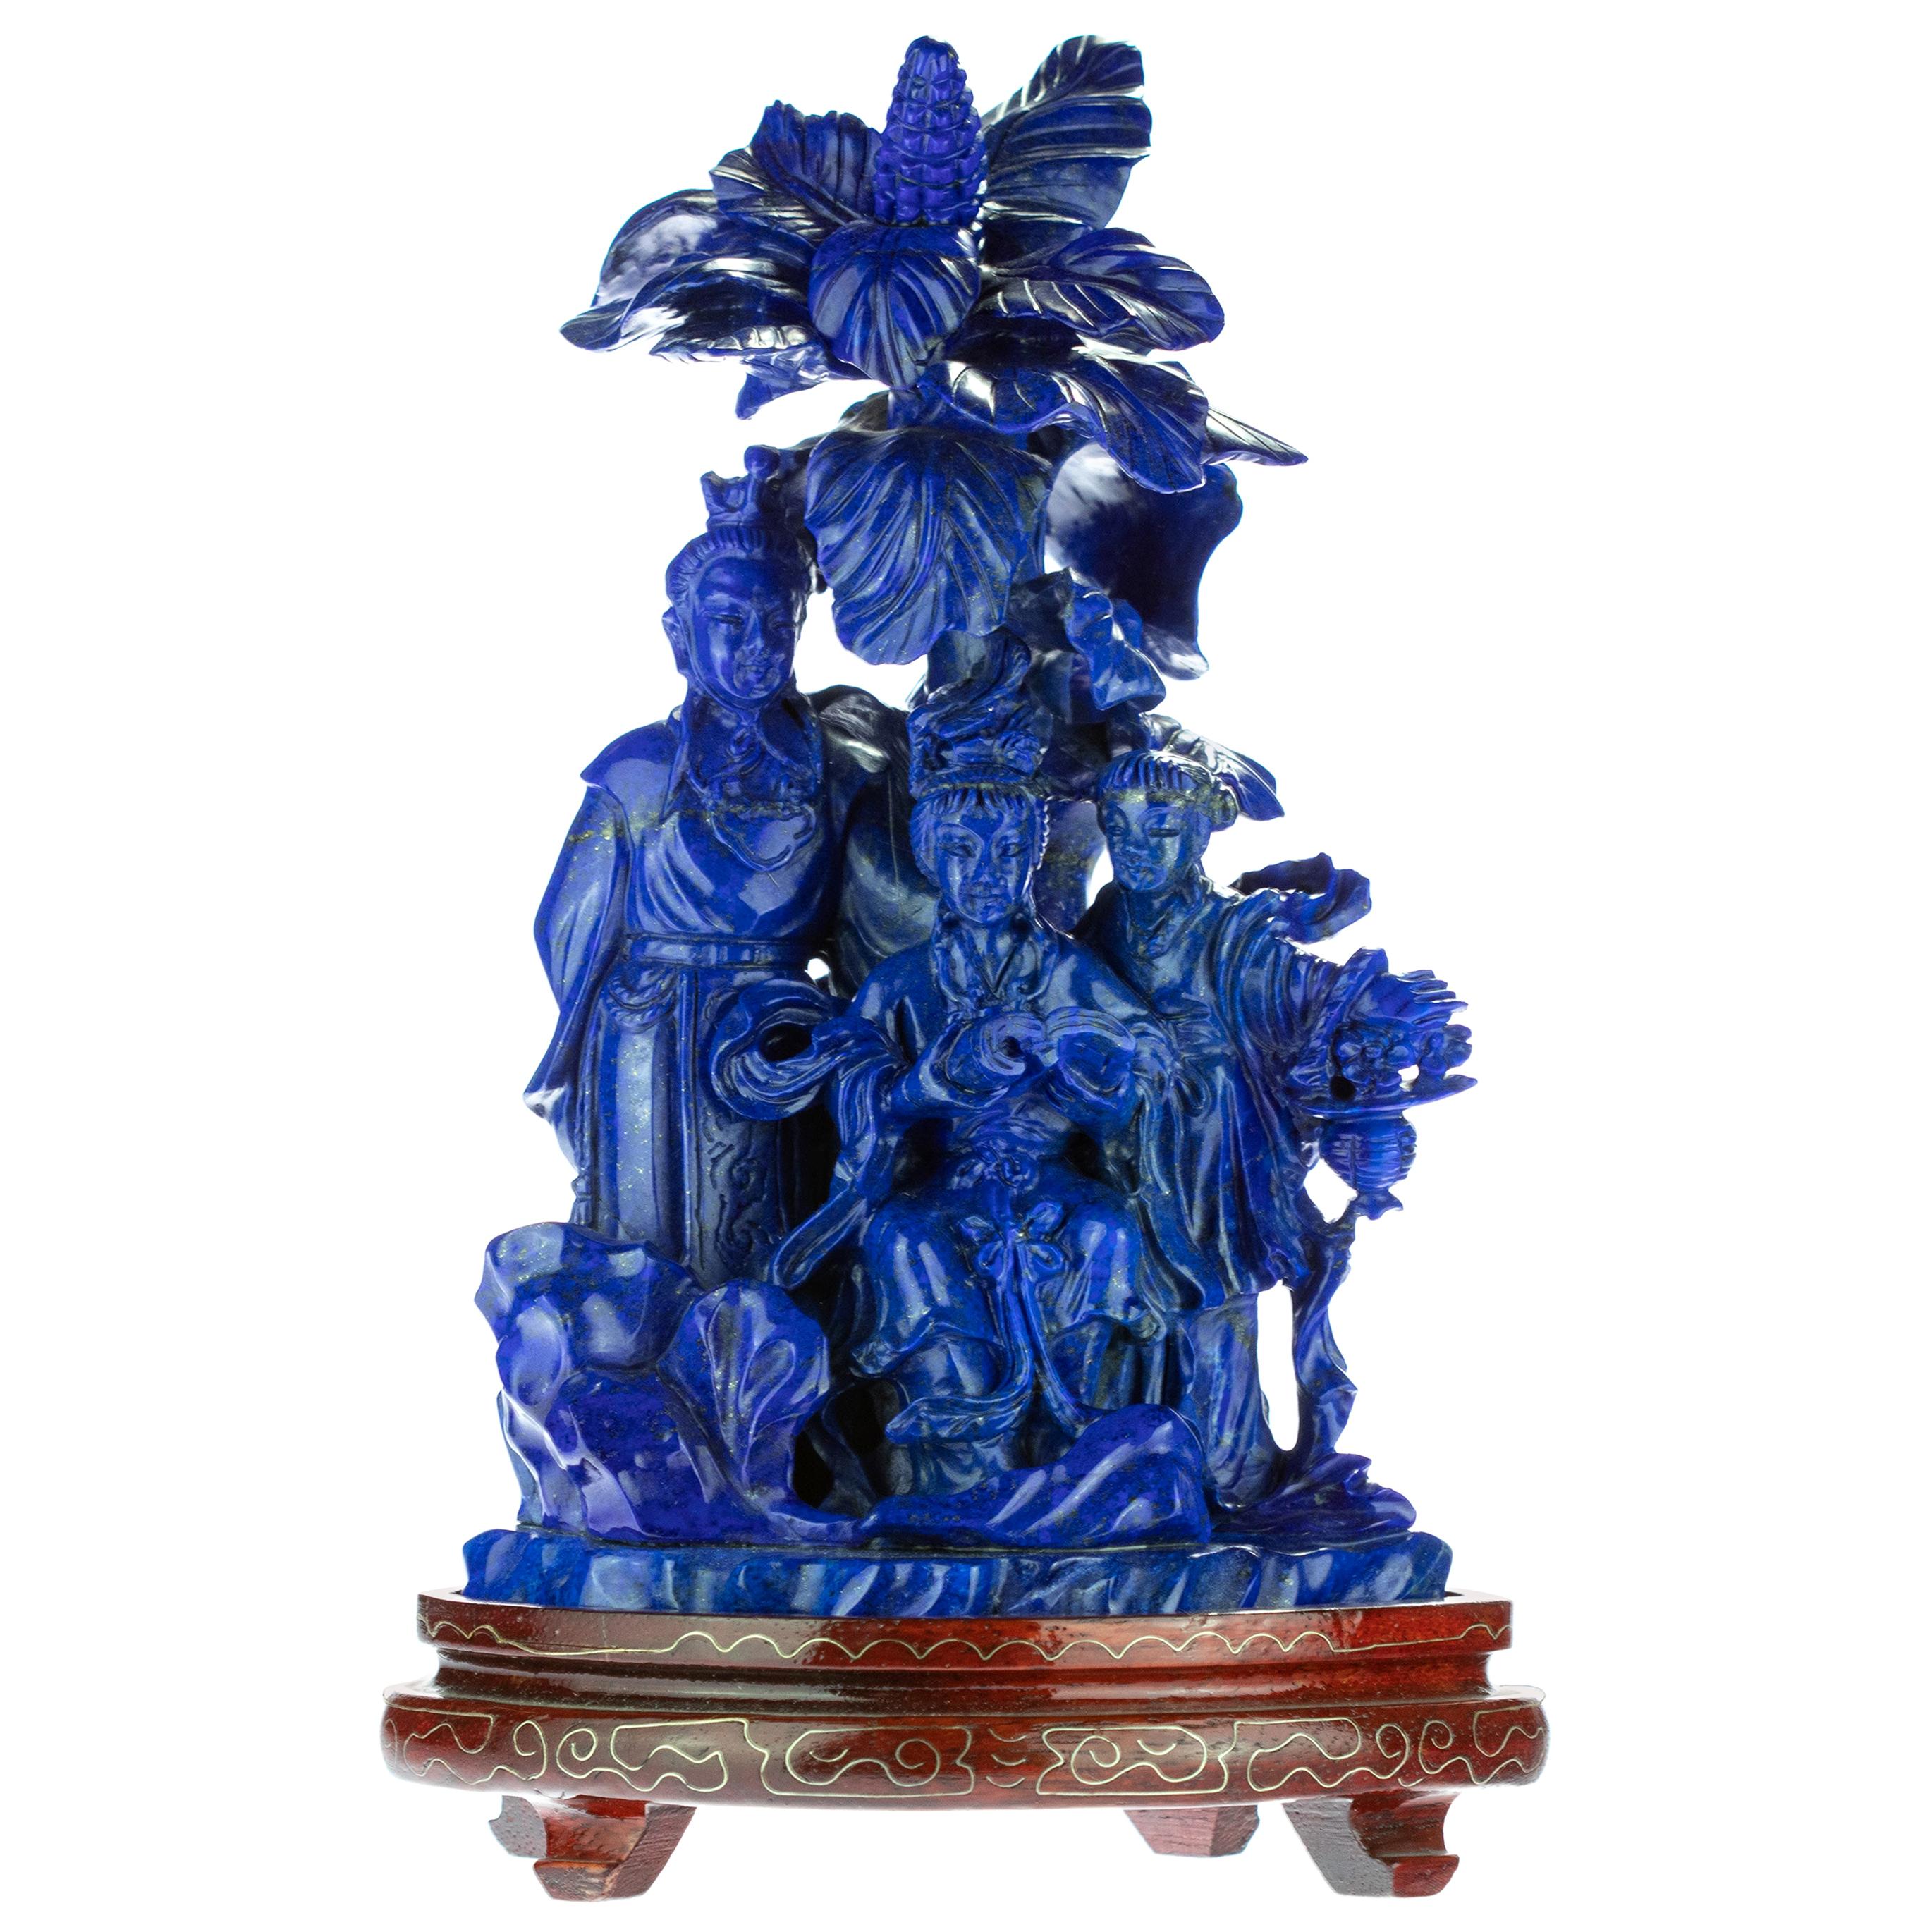 Lapis Lazuli Imperial Family Carved Flower Gemstone Asian Art Statue Sculpture For Sale